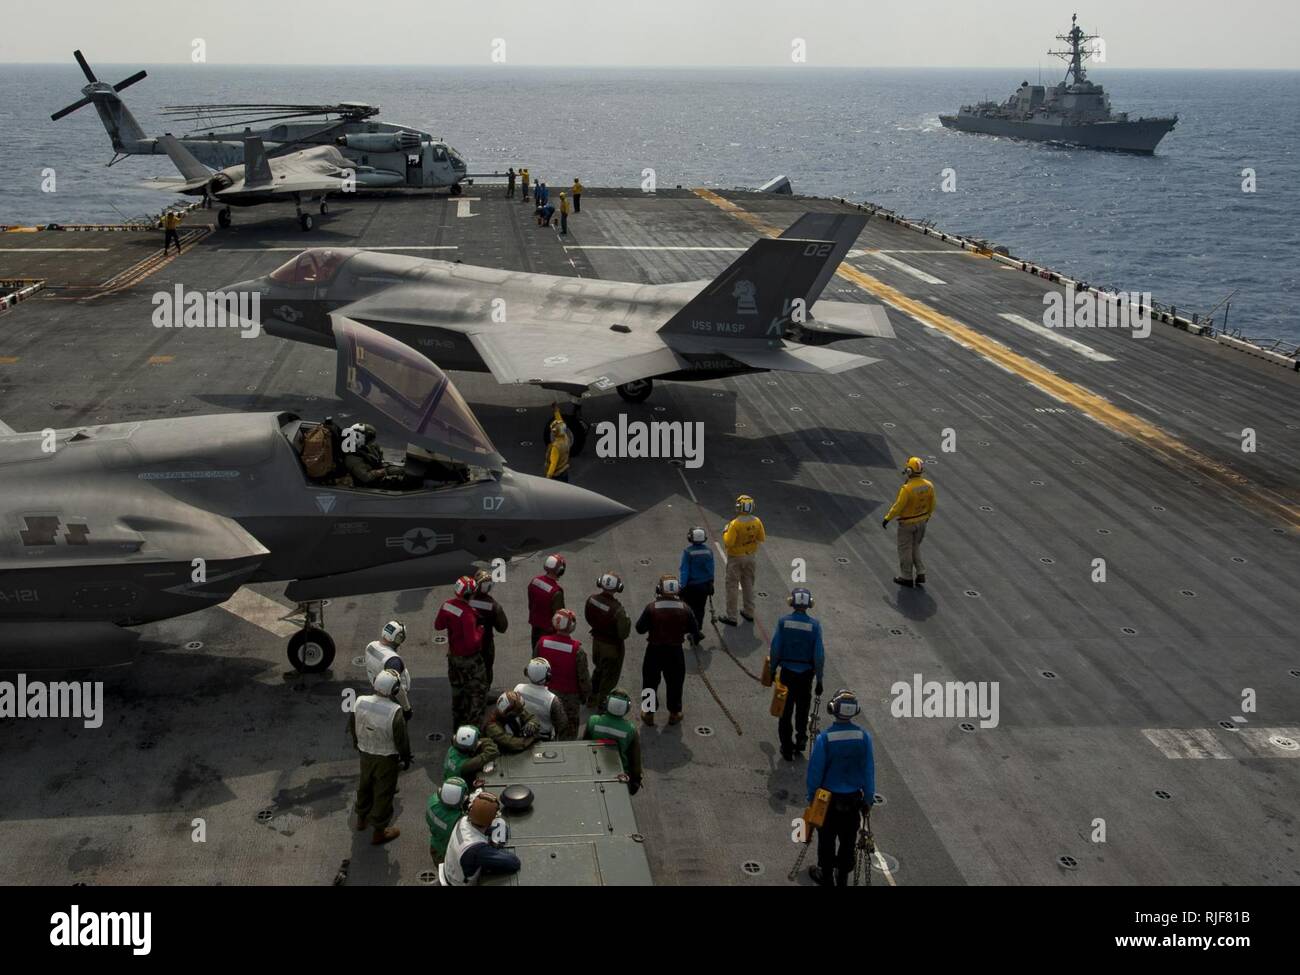 PHILIPPINE SEA (April 19, 2018) An F-35B Lightning II aircraft assigned to the 'Green Knights' of Marine Fighter Attack Squadron 121 (VMFA-121) maneuver on the flight deck of the amphibious assault ship USS Wasp (LHD 1) following a tactical recovery of aircraft and personnel. Stock Photo